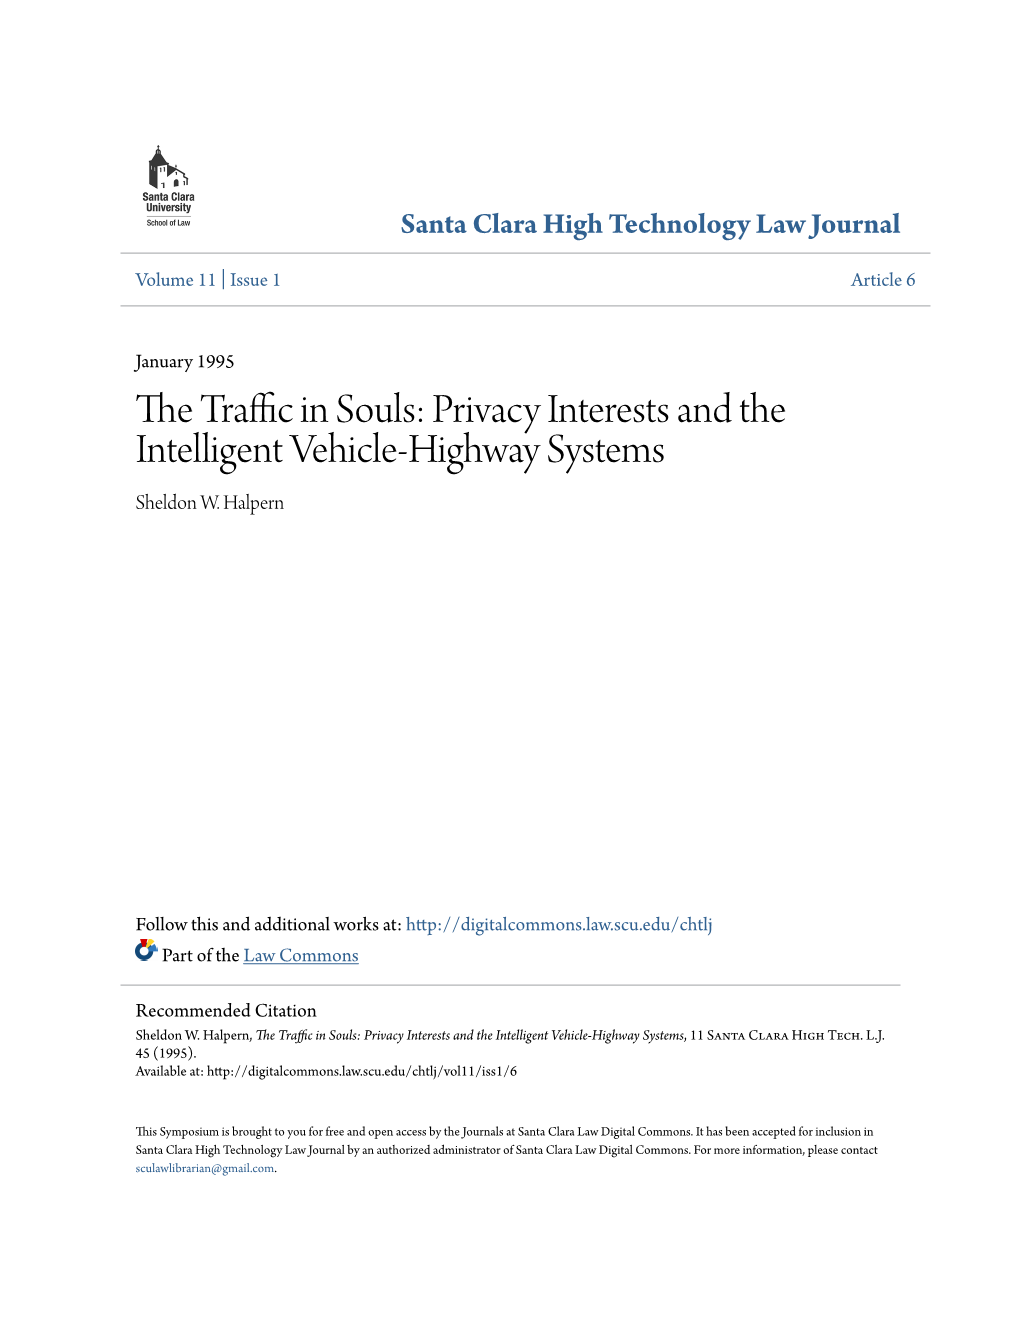 Privacy Interests and the Intelligent Vehicle-Highway Systems Sheldon W